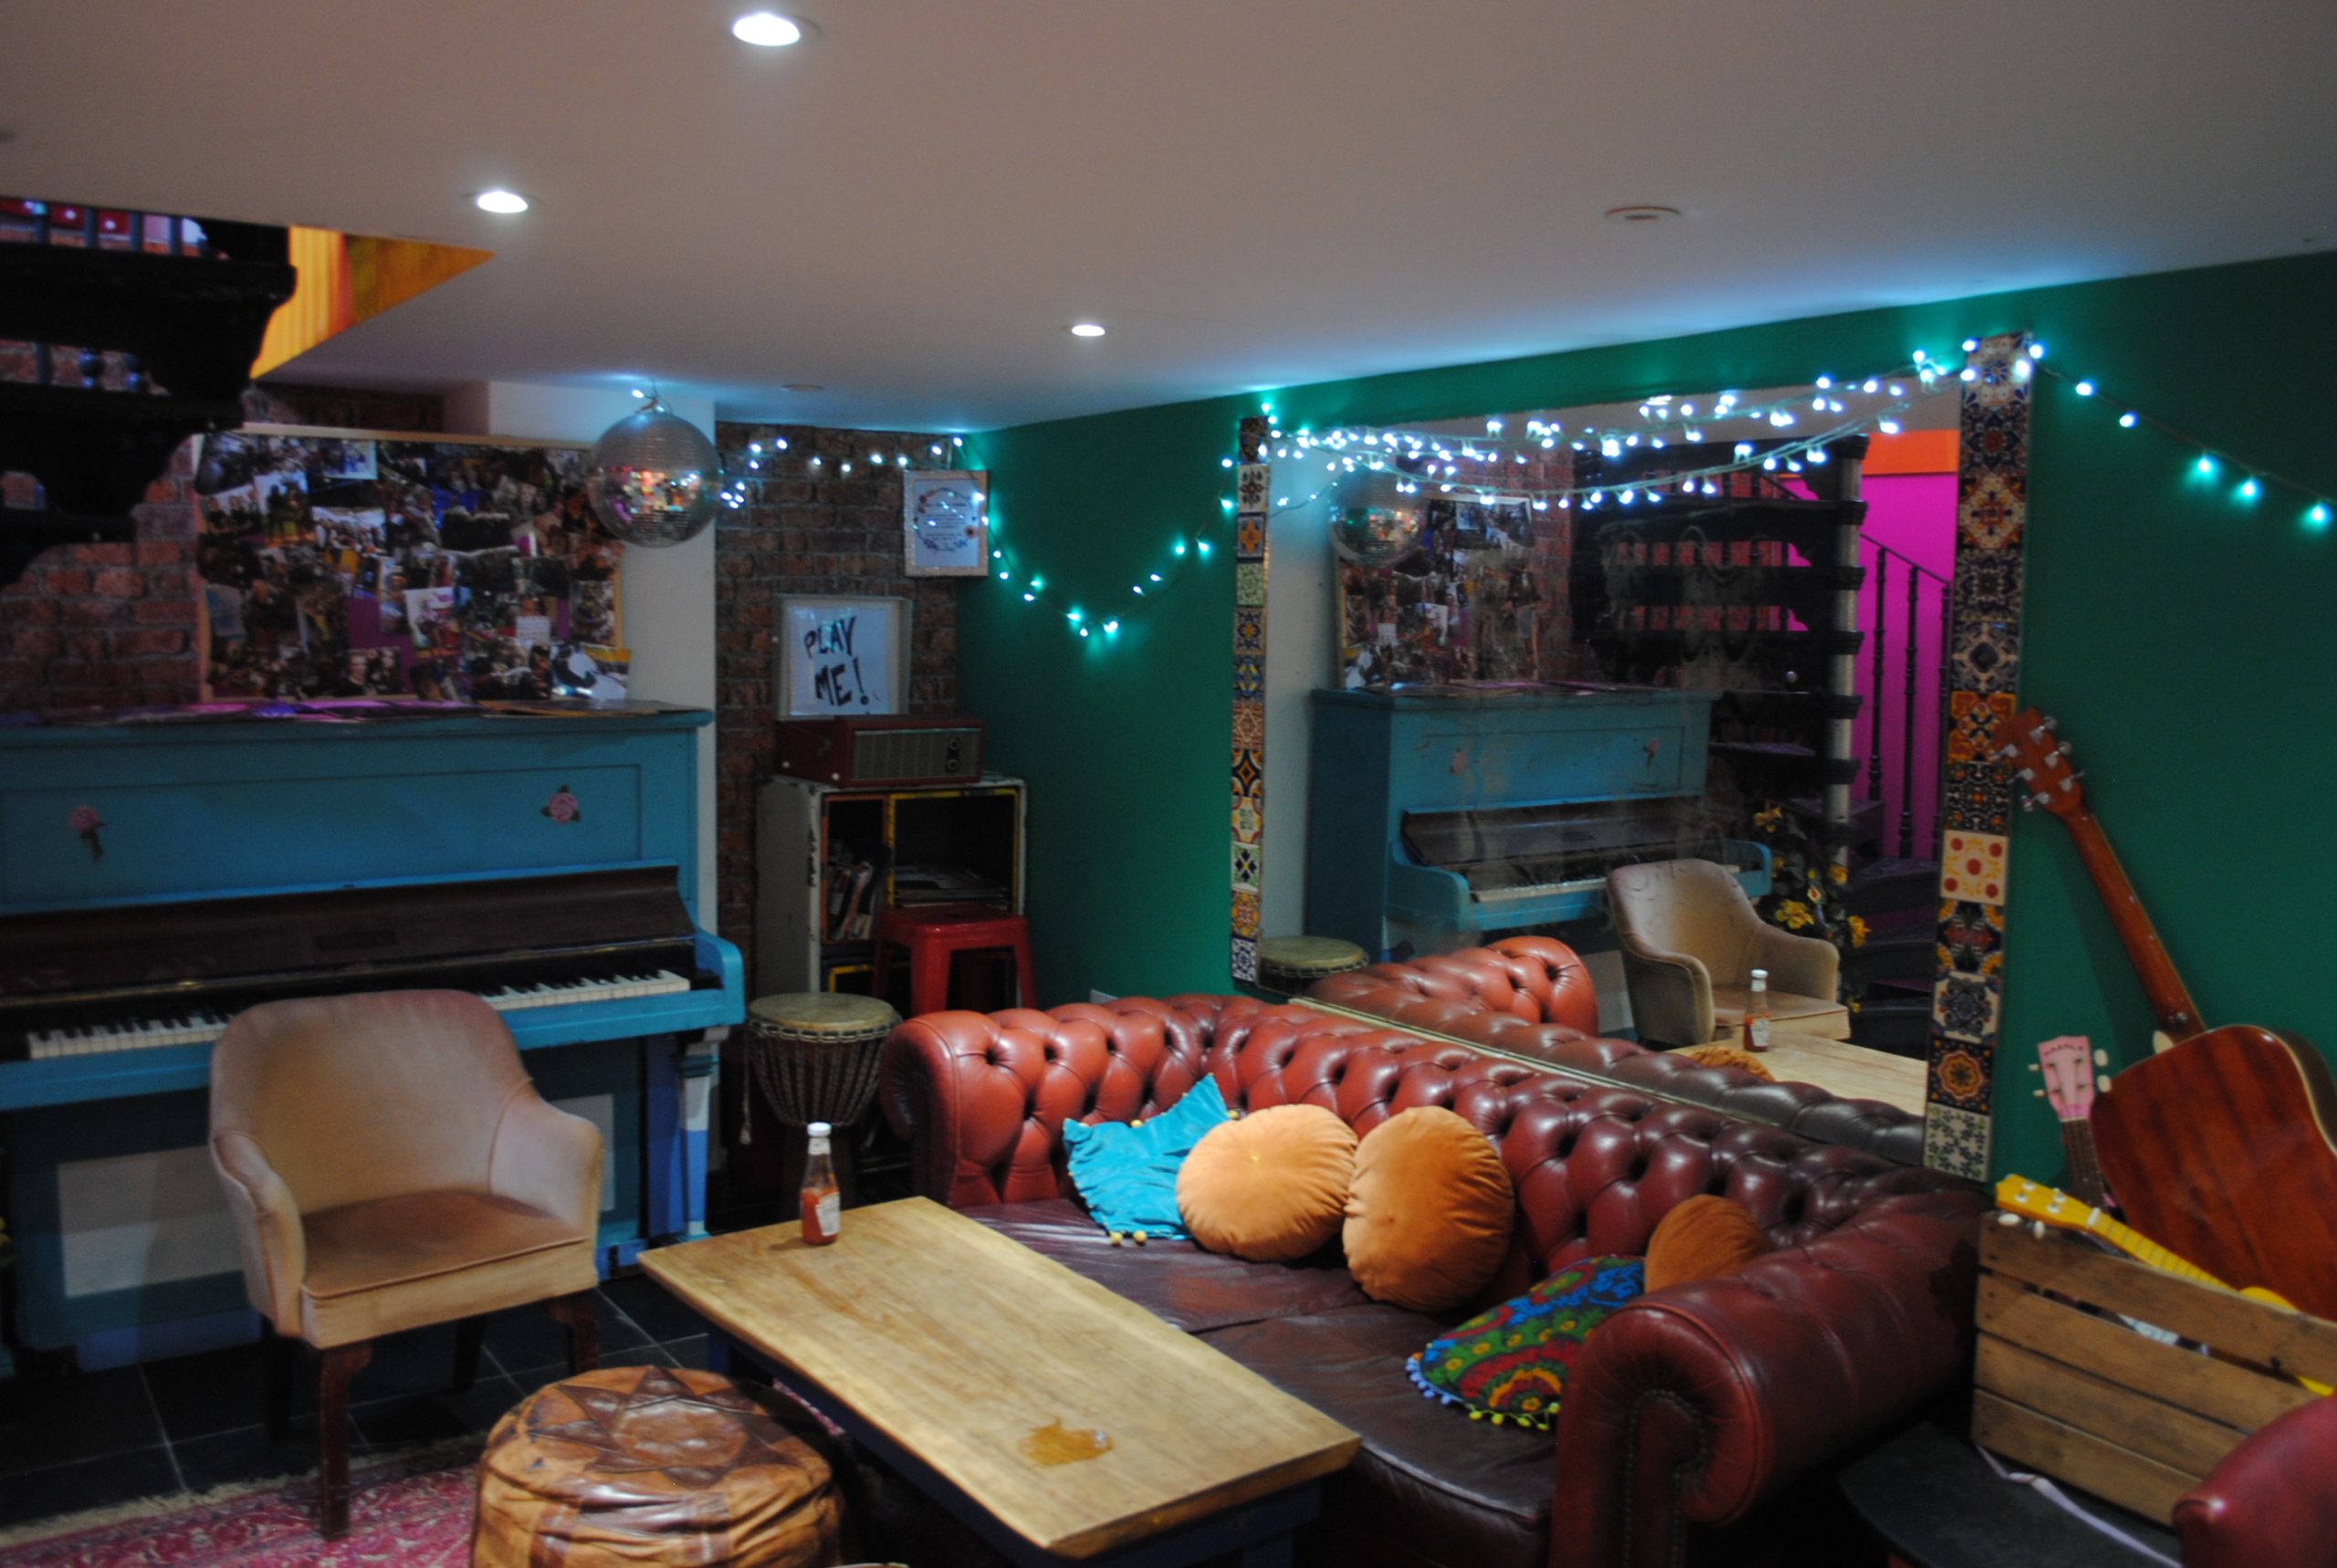 Go this Halloween to Charlie Fridays - here you see the downstairs area with colourful decor, fairy lights and comfortable furniture